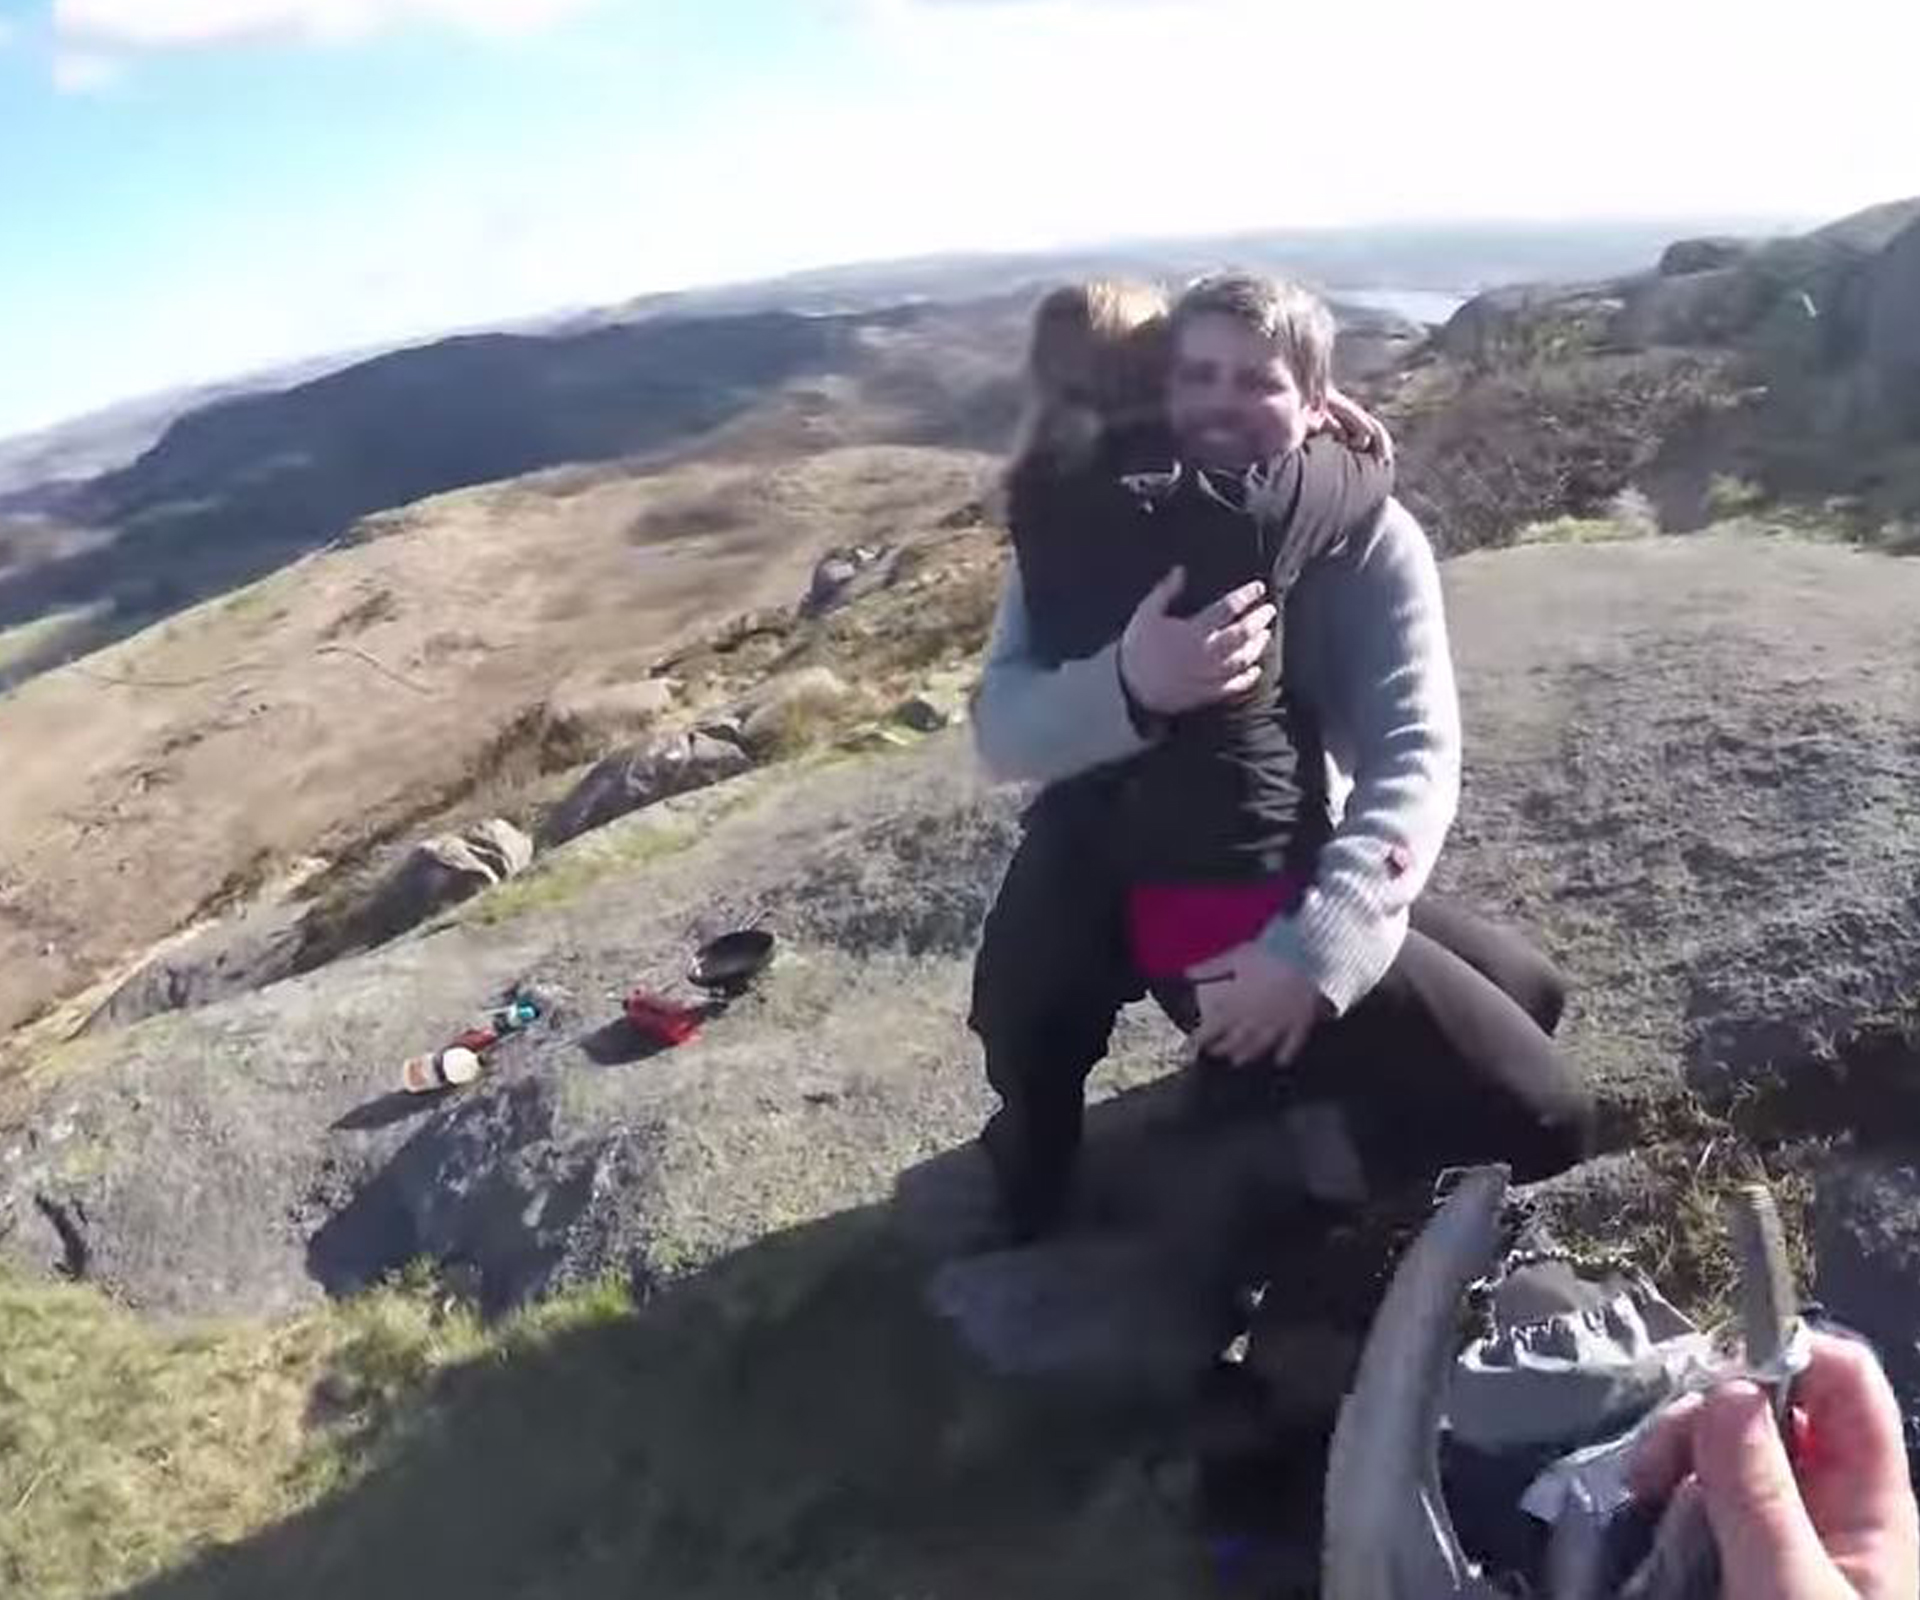 WATCH: ‘Will you marry, marry my … my dad?’